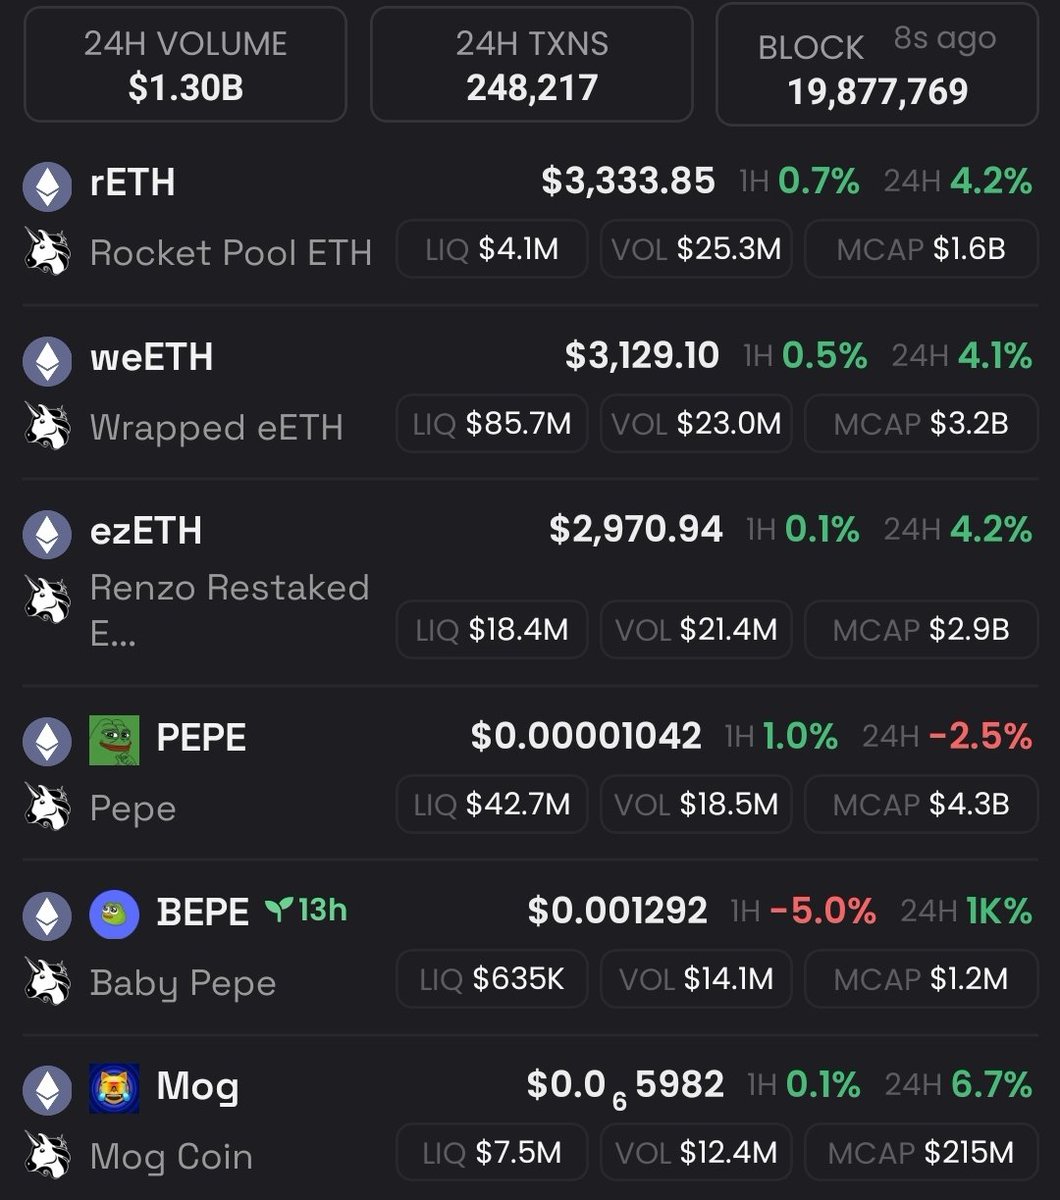 $PEPE and $MOG are top onchain ETH volume across all dexes during today's move up

eclipsed only by staked ETH (and a $PEPE vampire attack that will likely be dead within days)

this is the market tipping its hand

volume precedes price